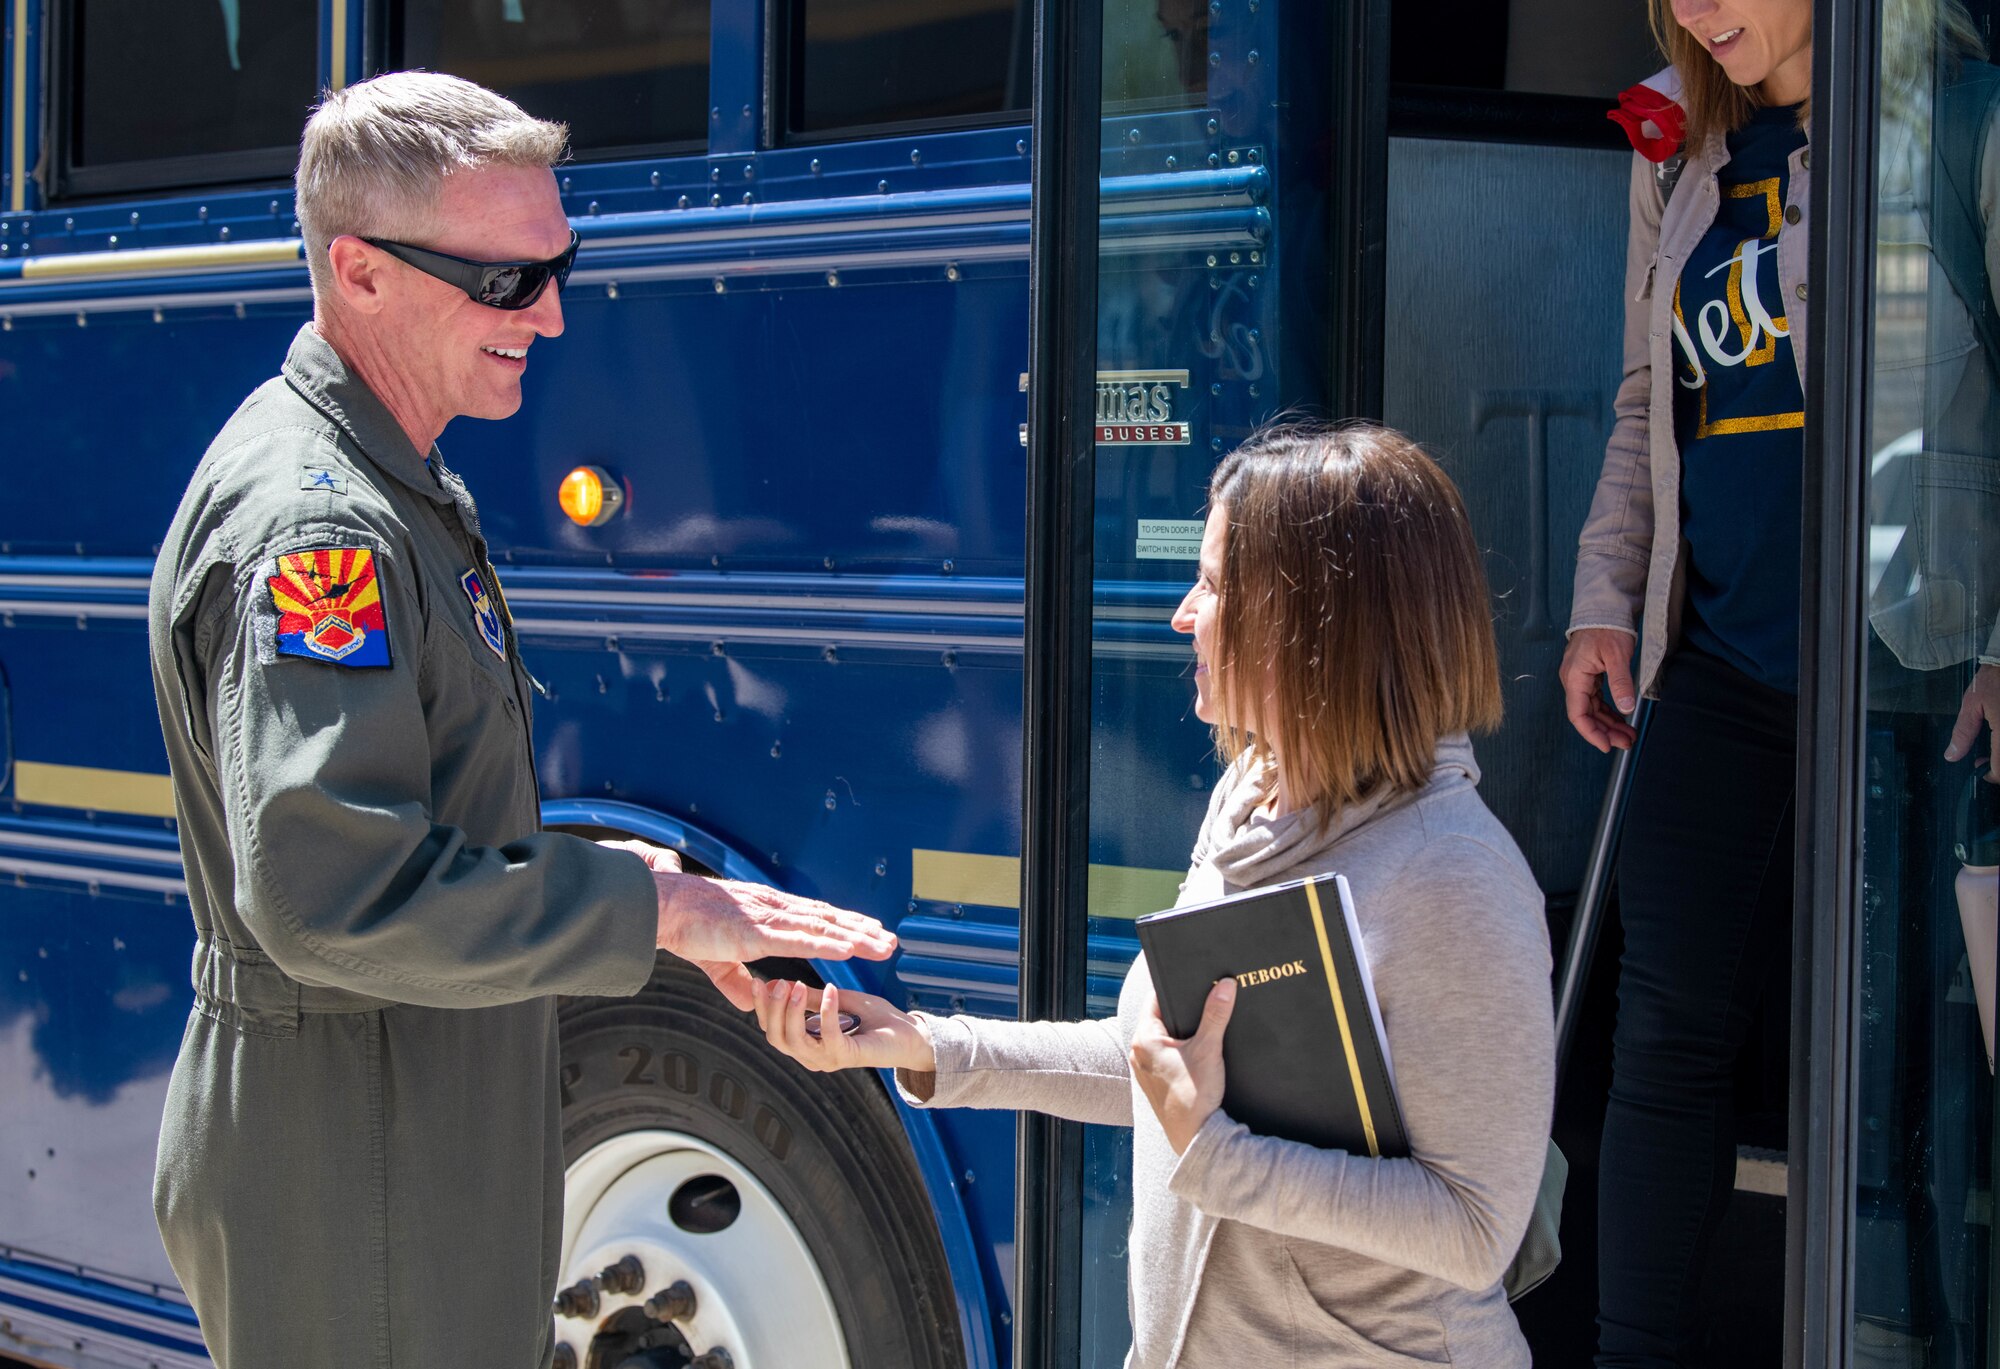 U.S. Air Force Brig. Gen. Jason Rueschhoff, 56th Fighter Wing commander, coins Michelle Hill, Dreaming Summit Elementary School principal, during the West Valley Educators Immersion Tour, March 31, 2023, at Luke Air Force Base, Arizona.